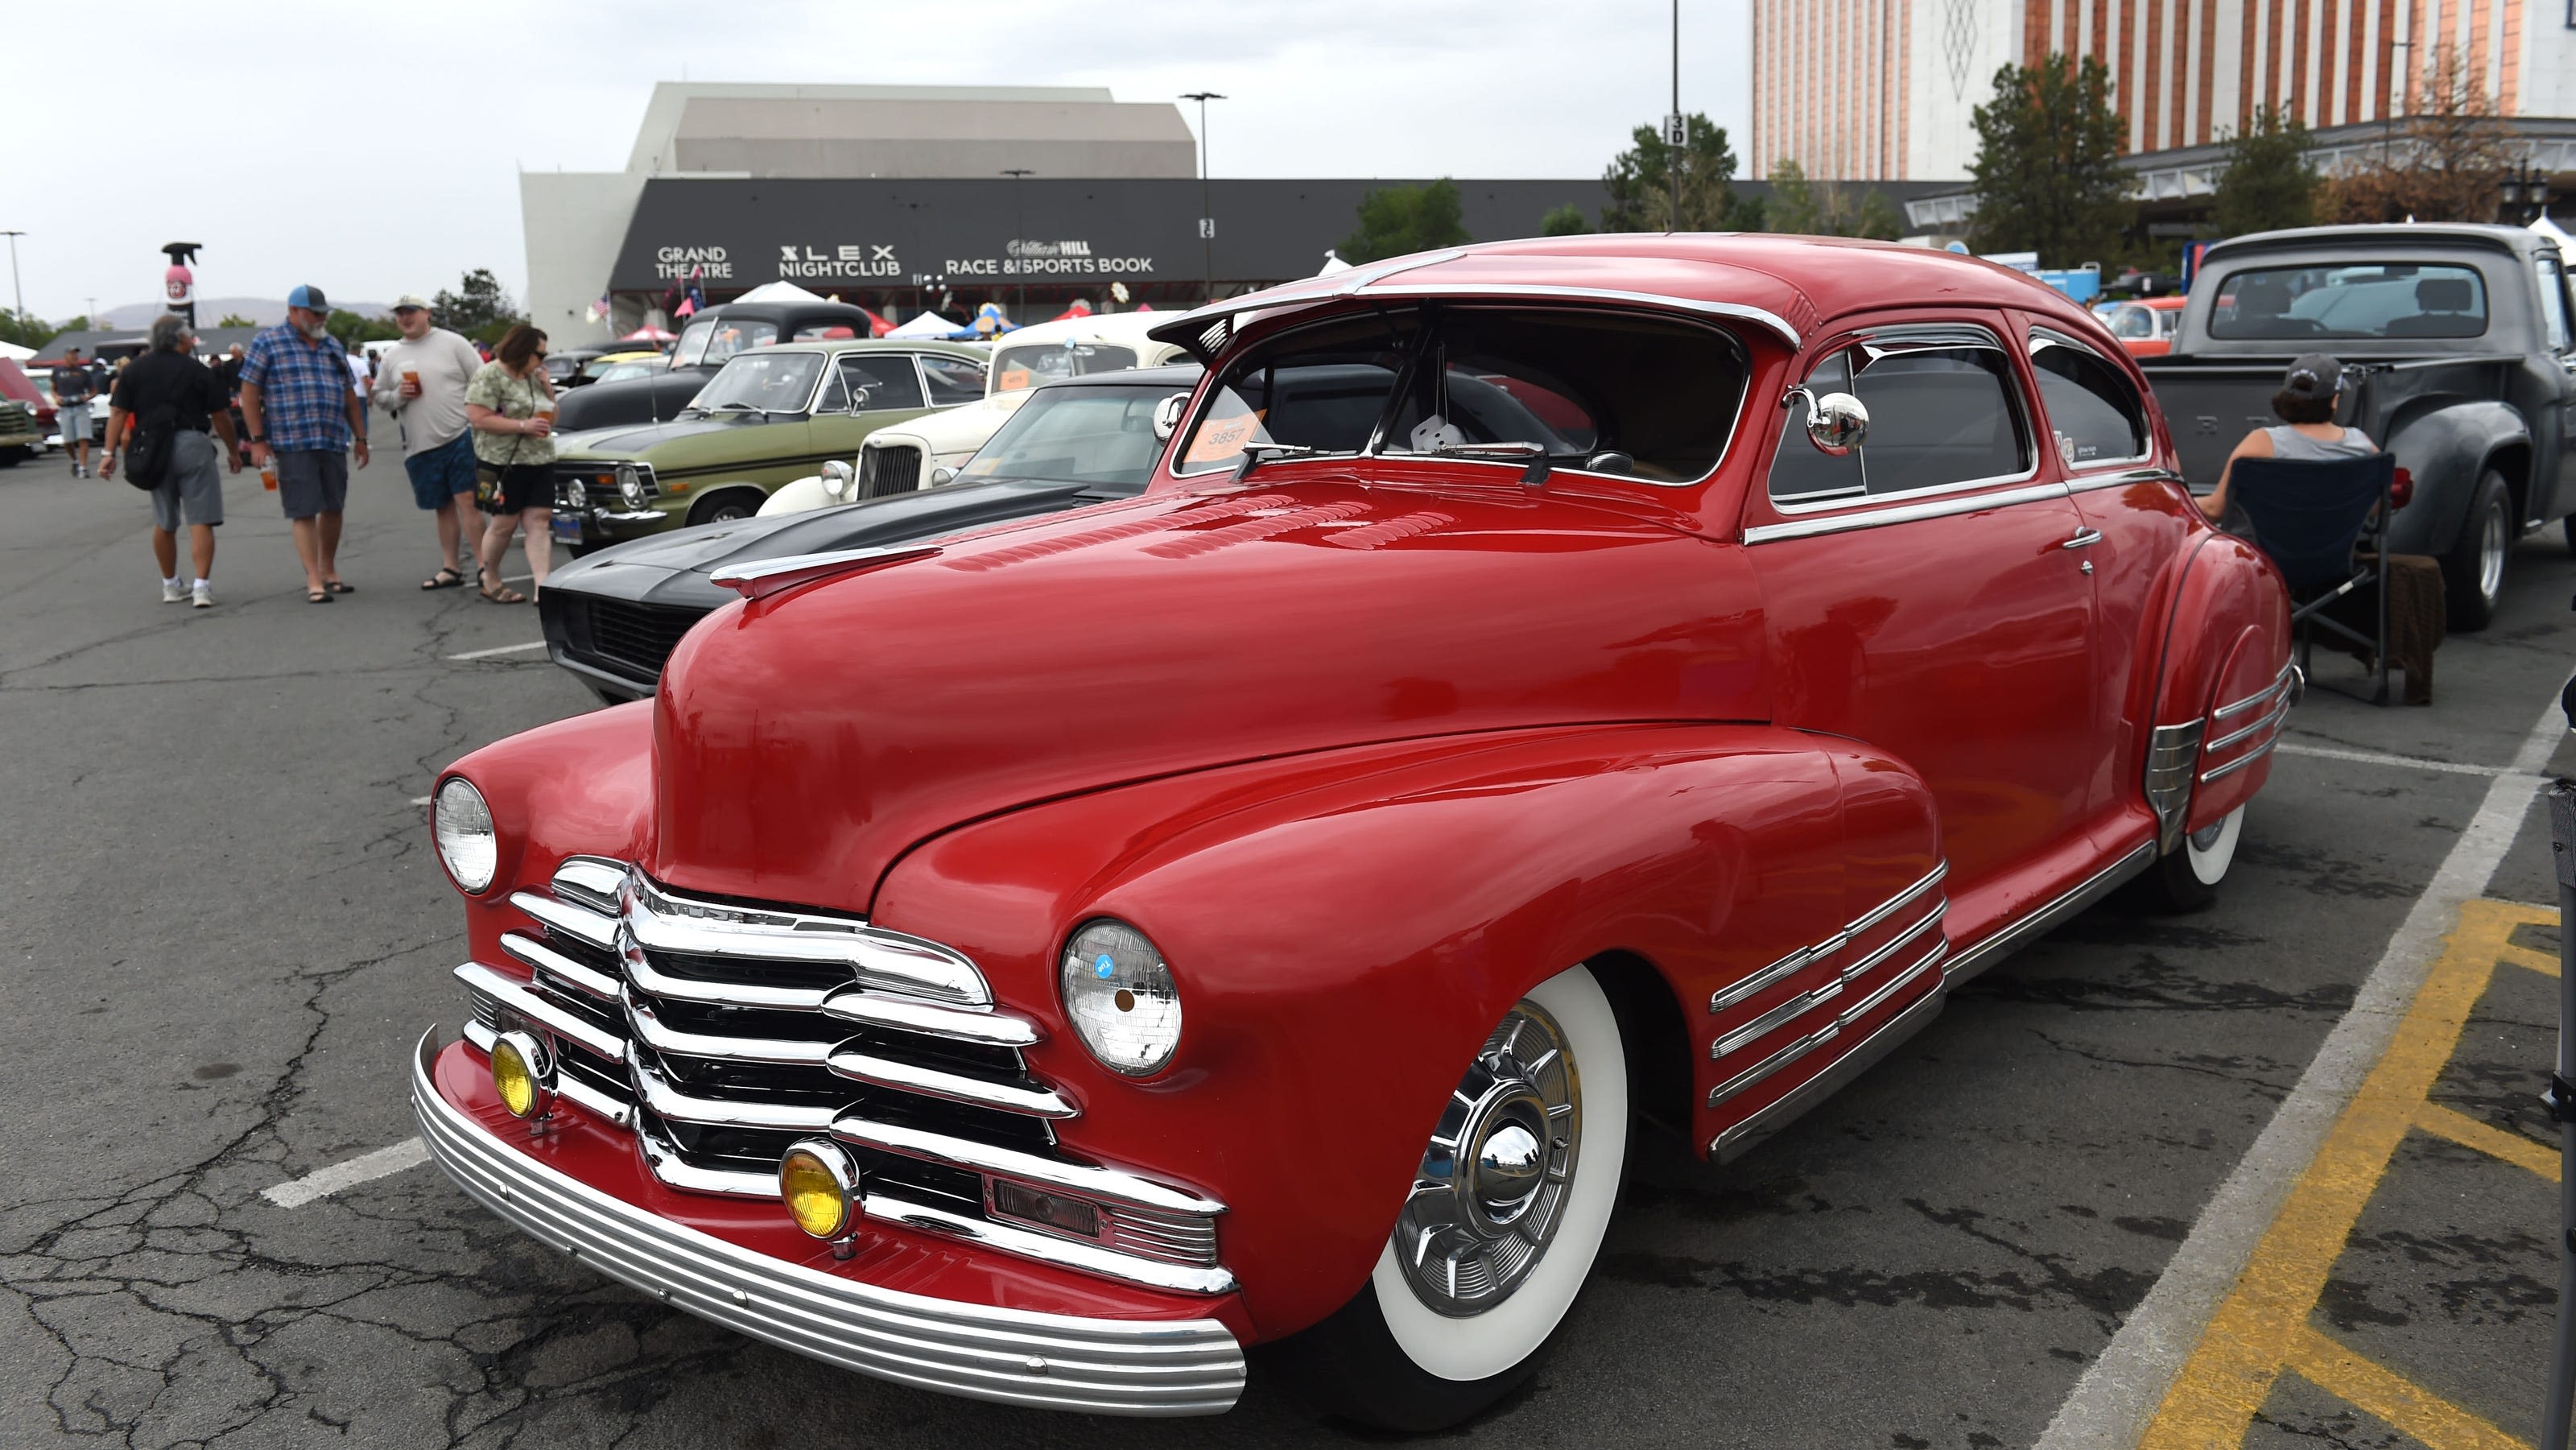 Classic cars, chili cook-off, Celtic festival and more this week in Northern Nevada